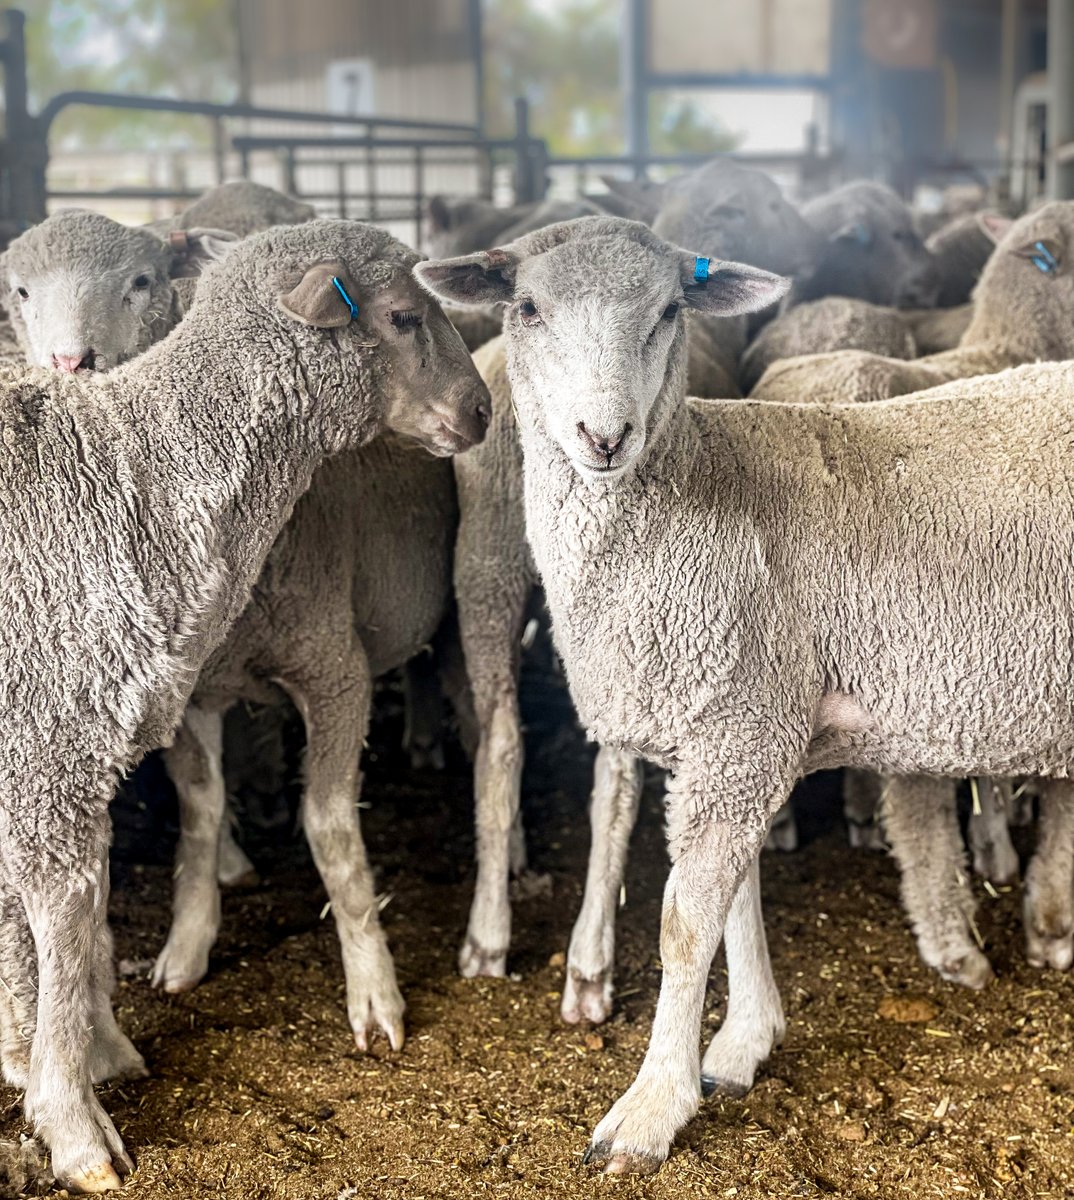 Sheep and goat producers, join an upcoming webinar on eID equipment 🤠🐑 Hosted by @SheepProducers and presented by the Sheep and Goat Traceability Task Force! Listen live on 28 March at 4pm or catch the recording ➡ sheepproducers.com.au/sgttfwebinarse…